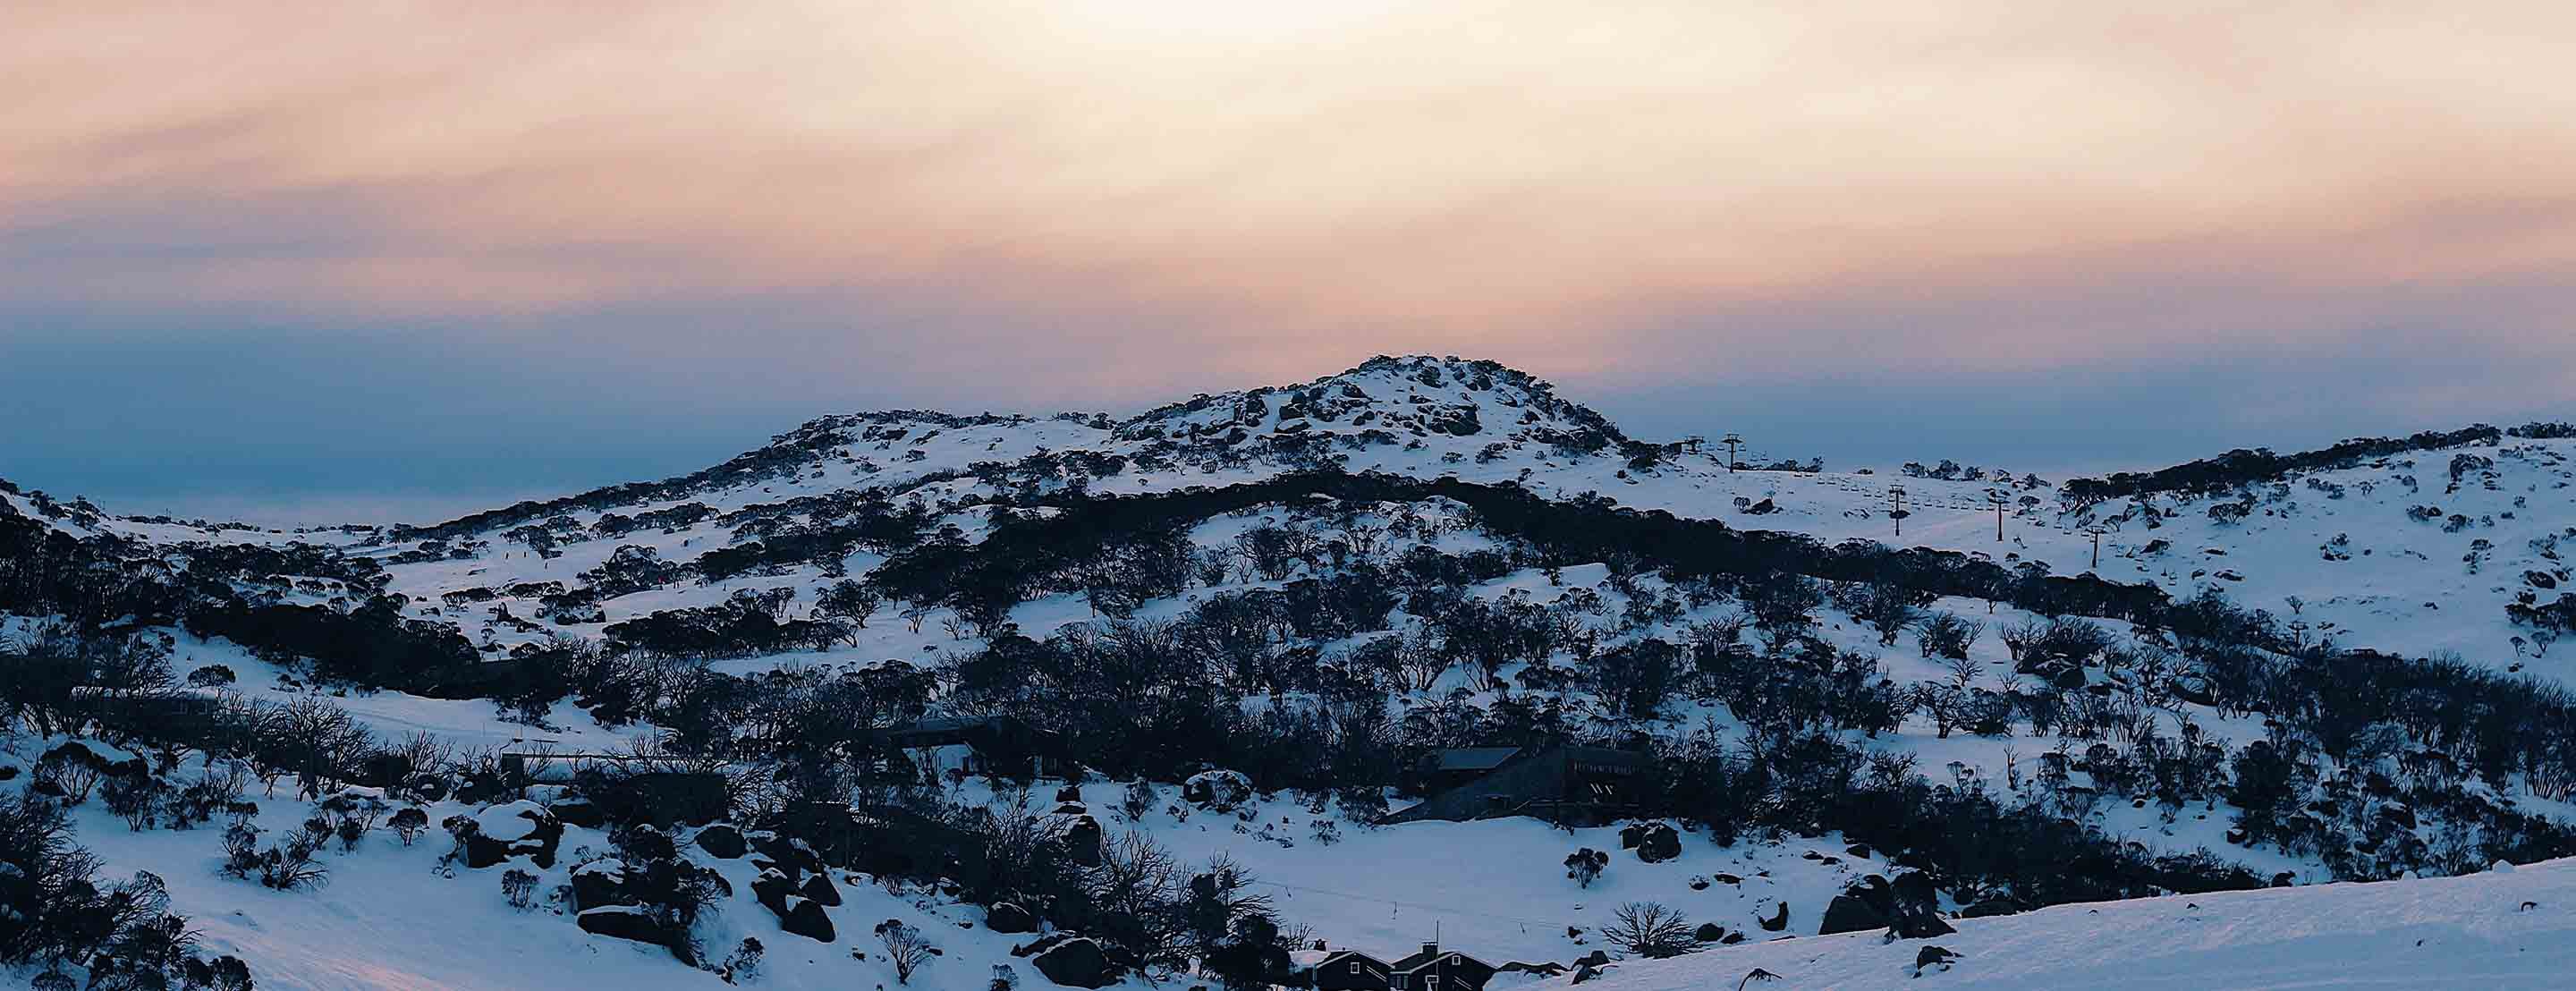 Snow capped mountains at Perisher near Jindabyne